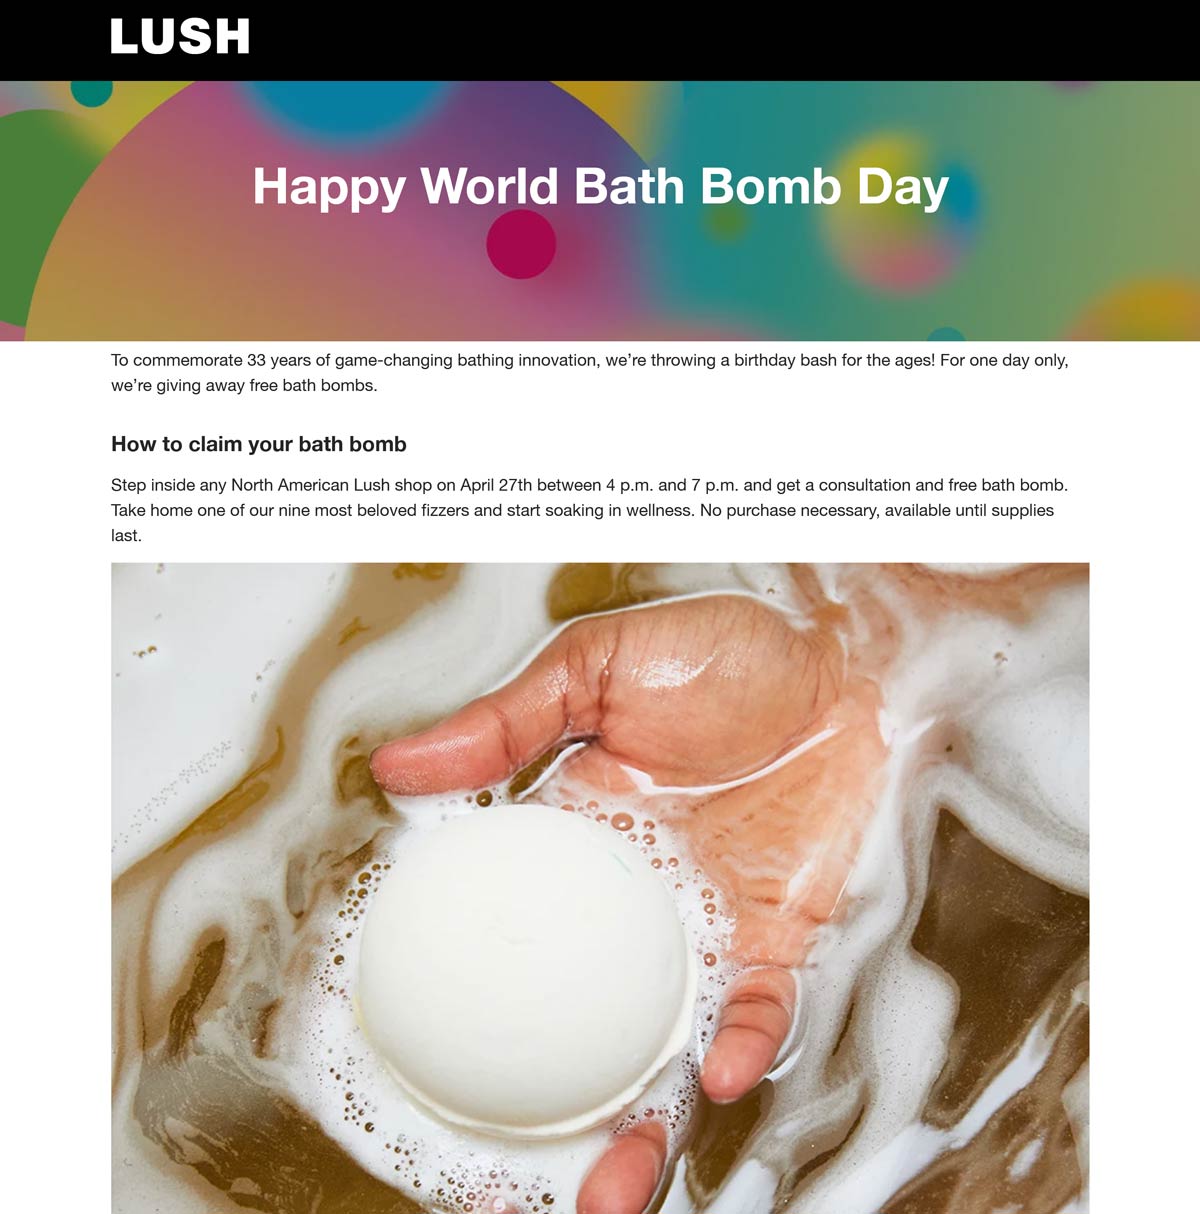 Lush stores Coupon  Free bath bomb in-store today 4-7p at Lush, no purchase necessary #lush 